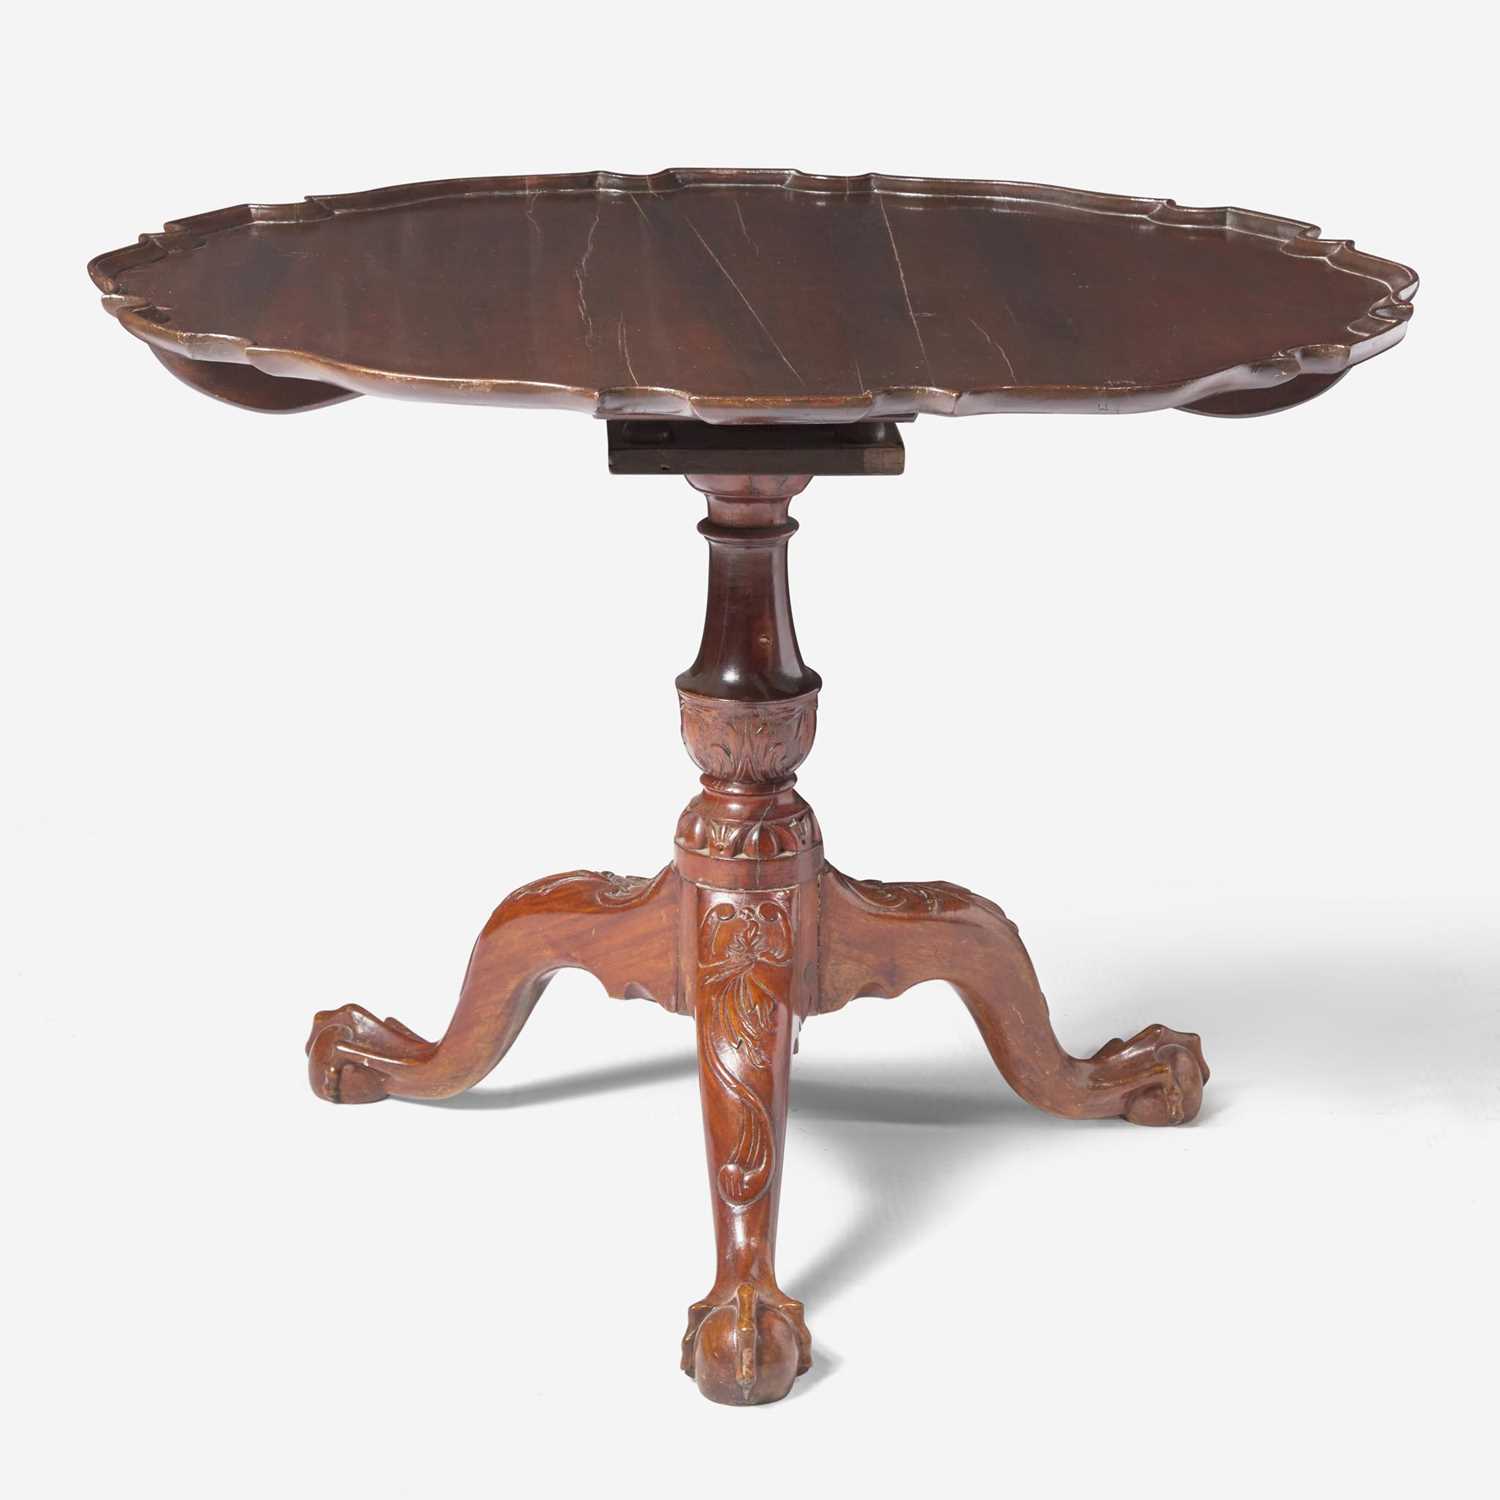 Lot 29 - An impressive George III Chippendale carved mahogany tilt-top tea table